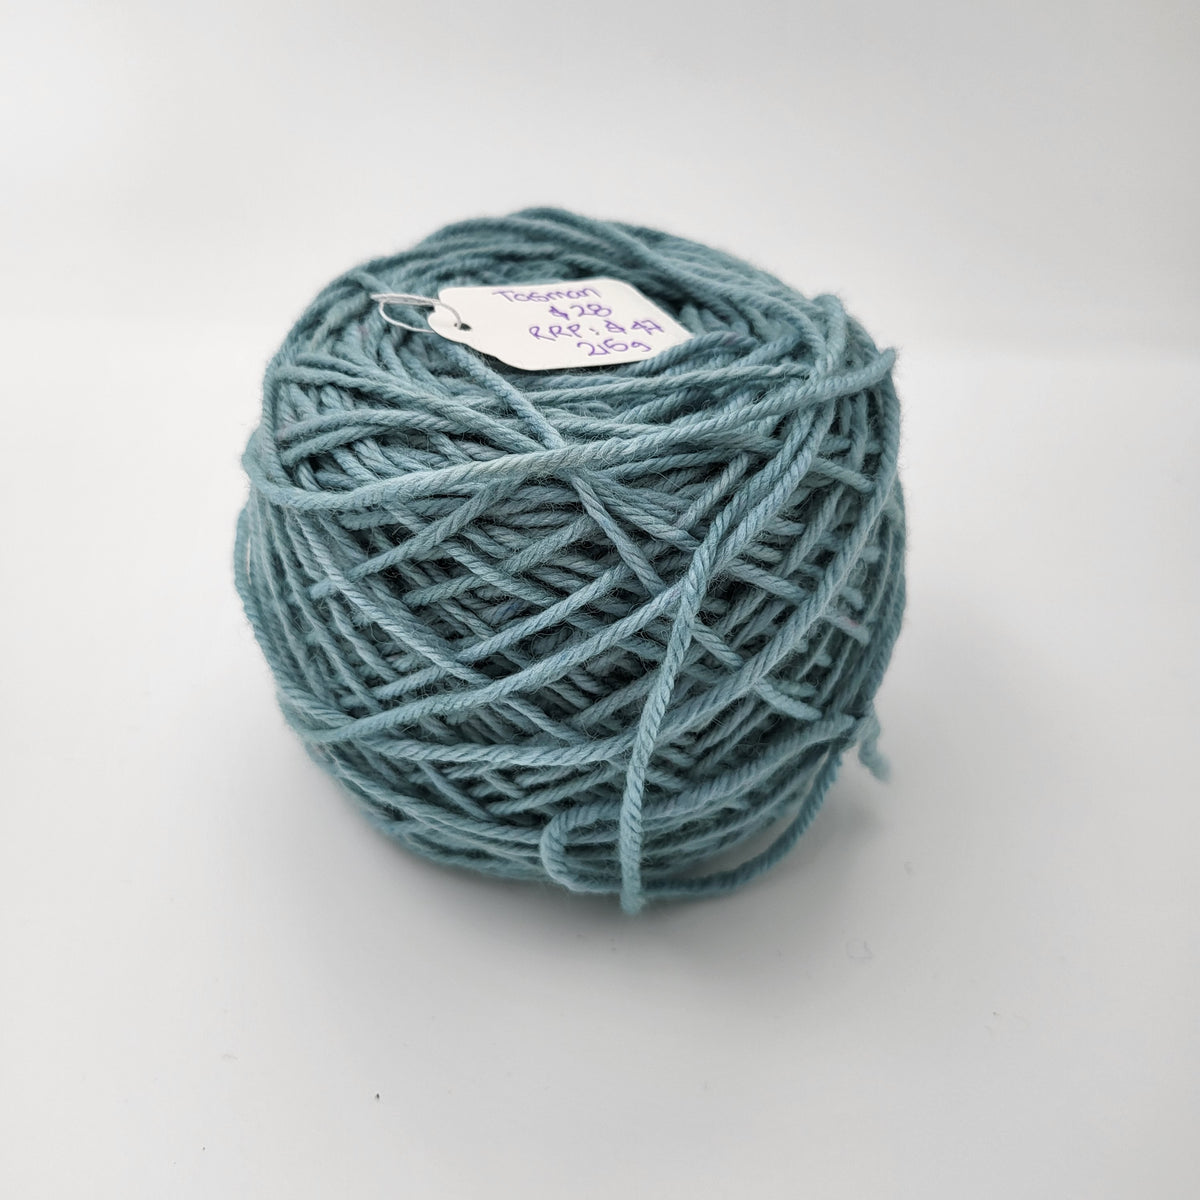 Hand-dyed Merino Wool 50gms cakes